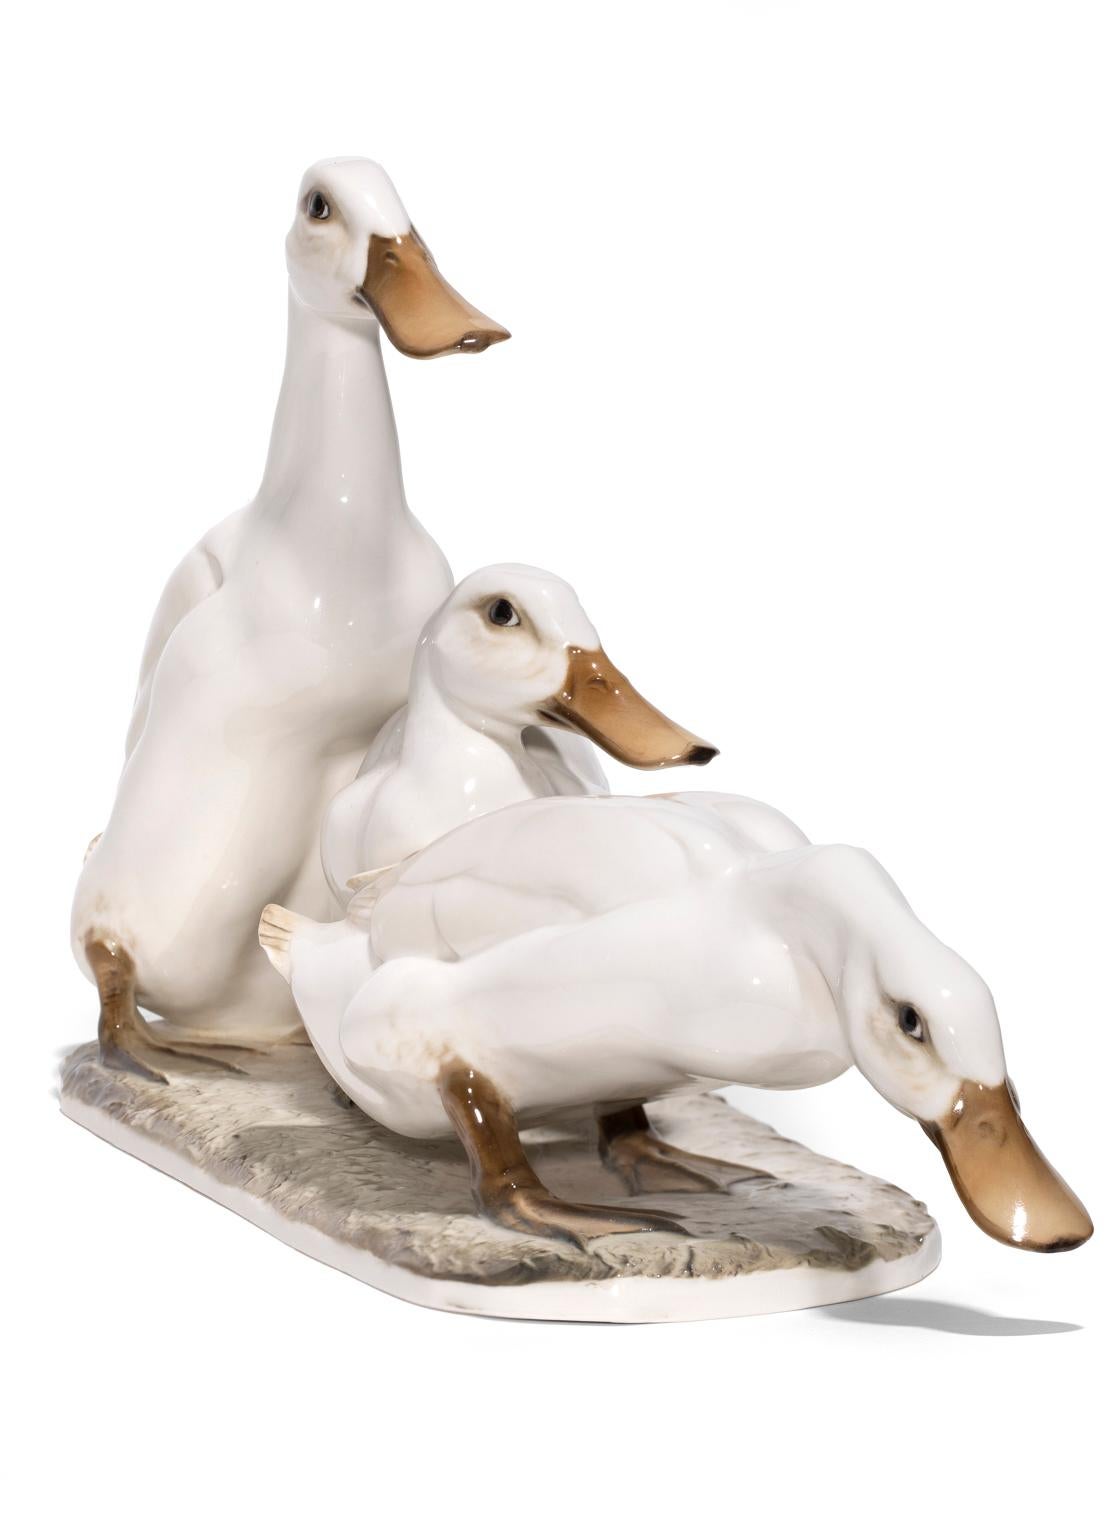 Early 20th Century Hutschenreuther-Selb Porcelain Figurine 